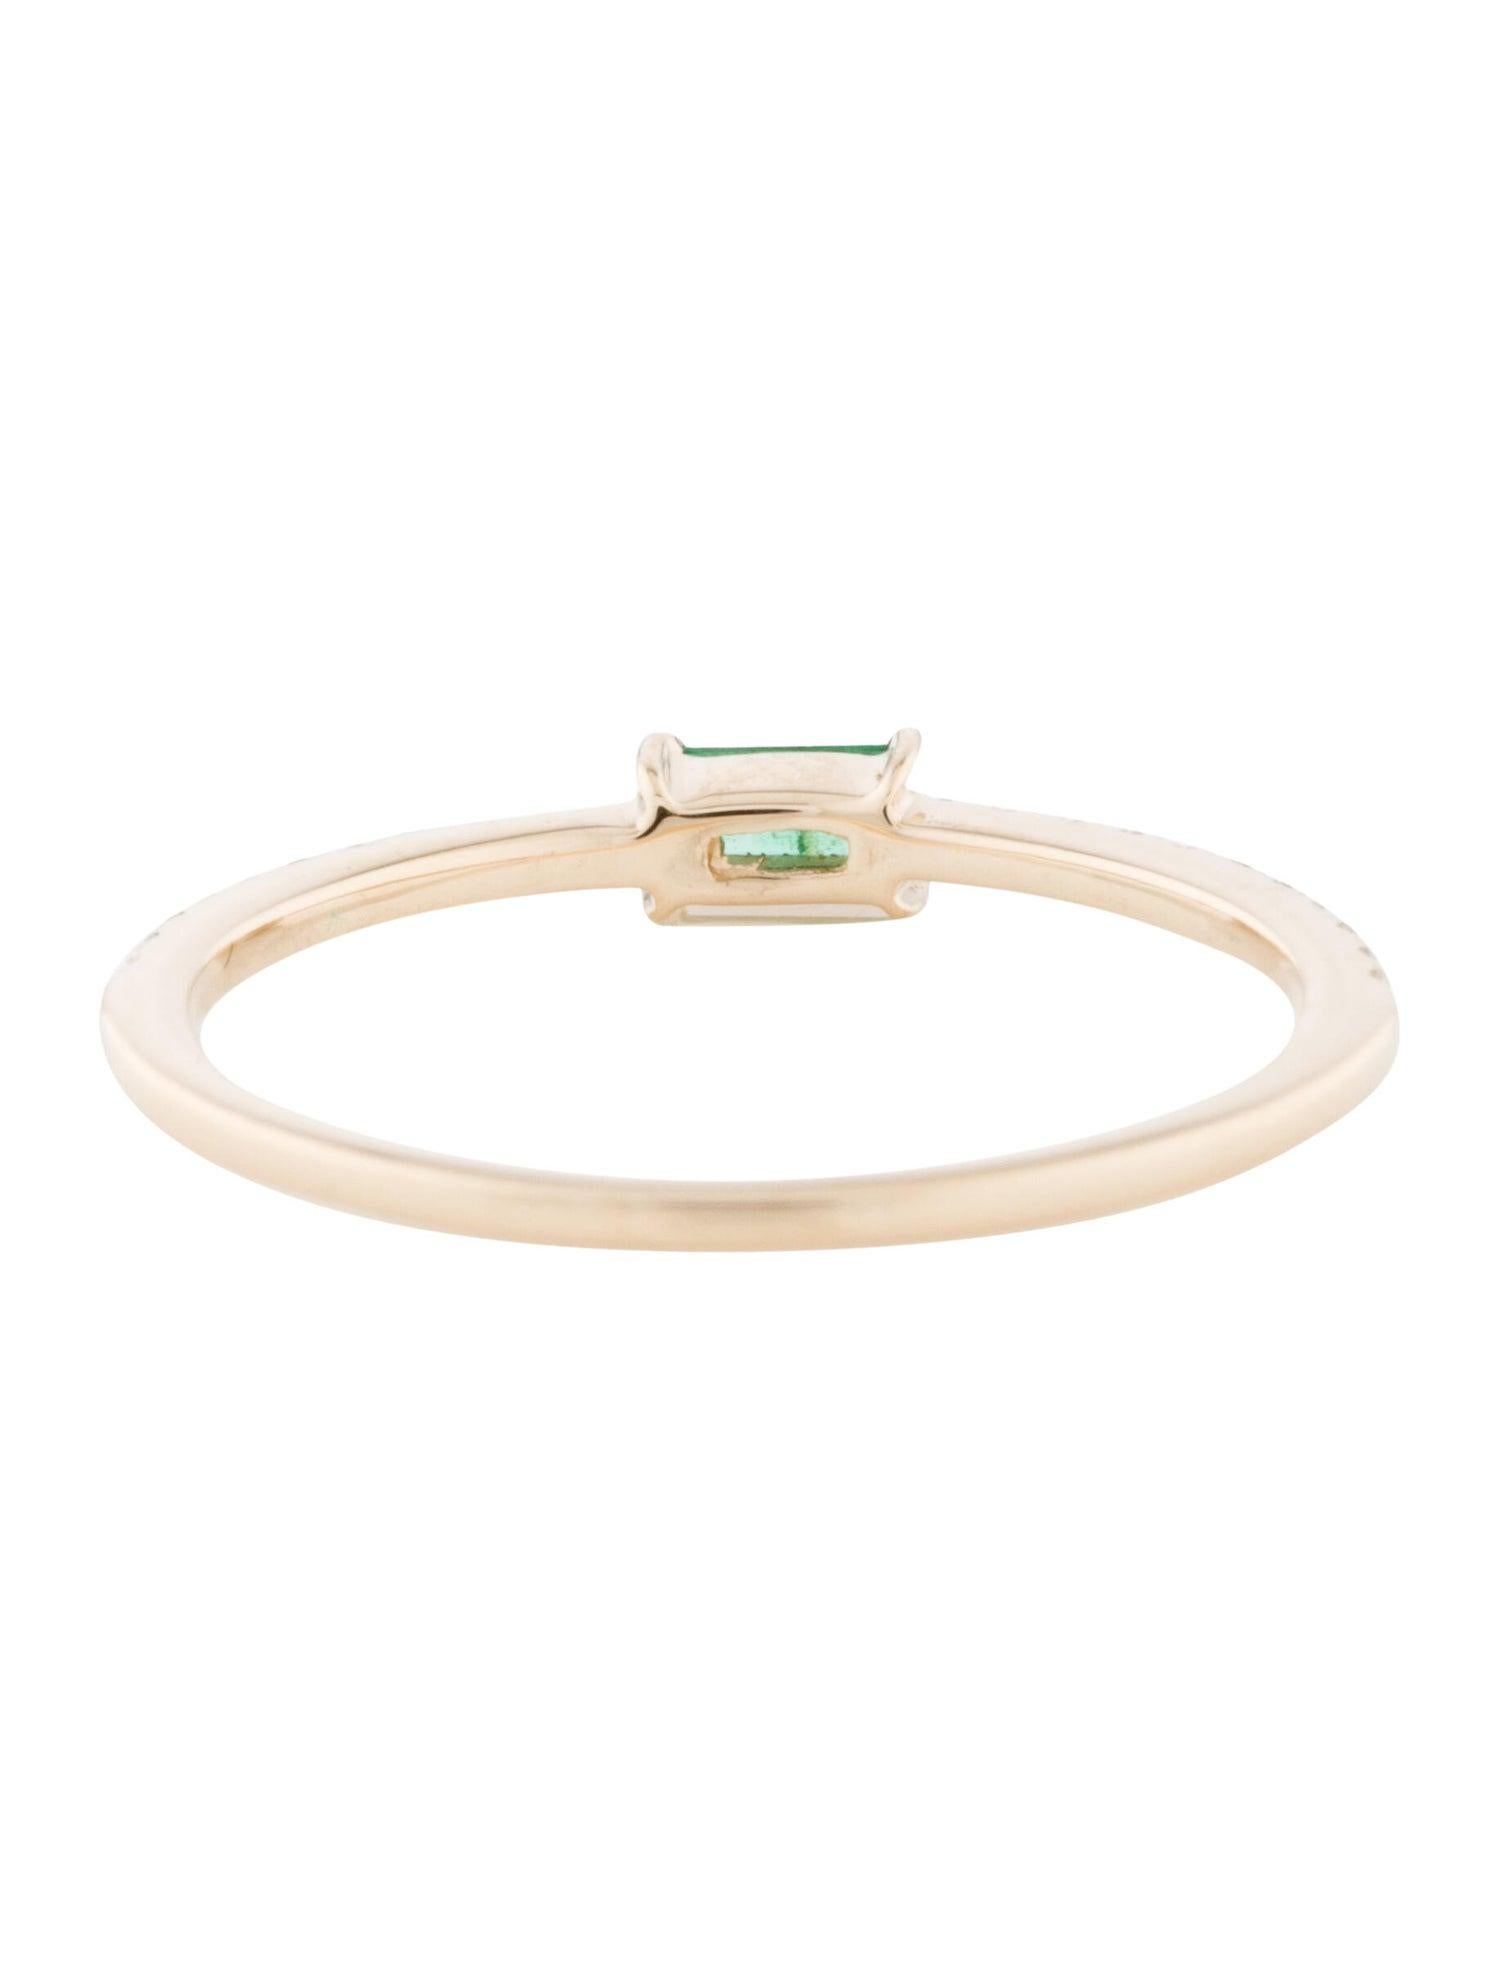 Contemporary 14 Karat Yellow Gold Green Emerald Stackable Ring Birthstone